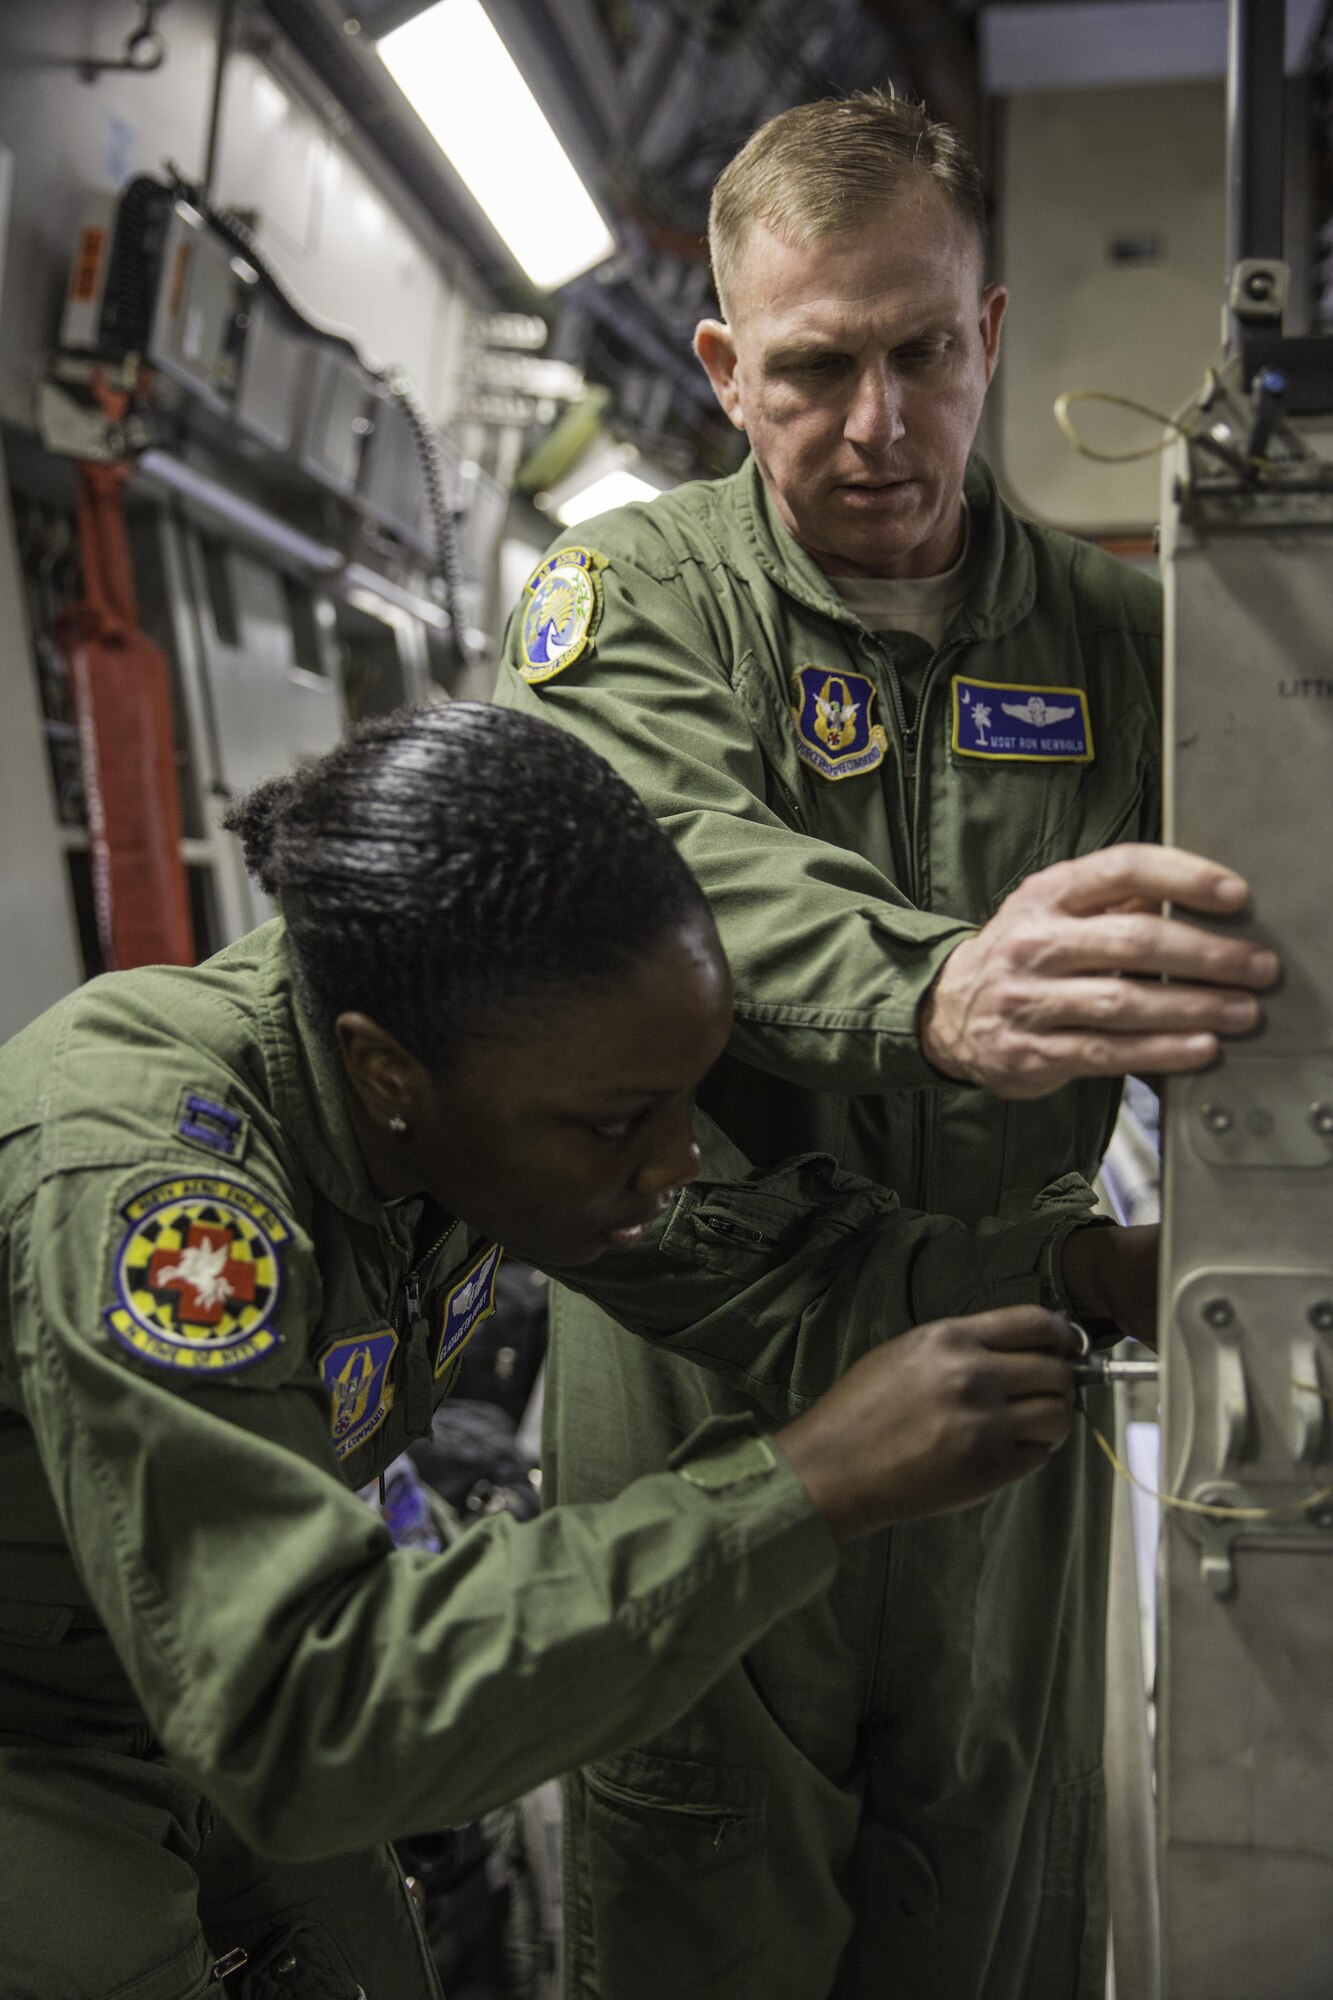 Master Sgt. Ron Newbold helps Capt. Elizabeth Kotey set up a litter stanchion Feb. 22, 2015 during a training mission in San Juan, Puerto Rico. The mission was part of a three day fly-away with Airmen from the 315th Airlift Wing at Joint Base Charleston, South Carolina and aeromedical Airmen from the 459th Air Refueling Wing at Joint Base Andrews, Maryland. The training mission was a cost-effective means to accomplish currency items and evaluations for flight crew members and provided C-17 familiarization and proficiency training for aeromedical Airmen. Newbold is a loadmaster with the 300th Airlift Squadron and Kotey is a flight nurses with the 459th Aeromedical Evacuation Squadron (U.S. Air Force Photo/Tech. Sgt. Shane Ellis)
